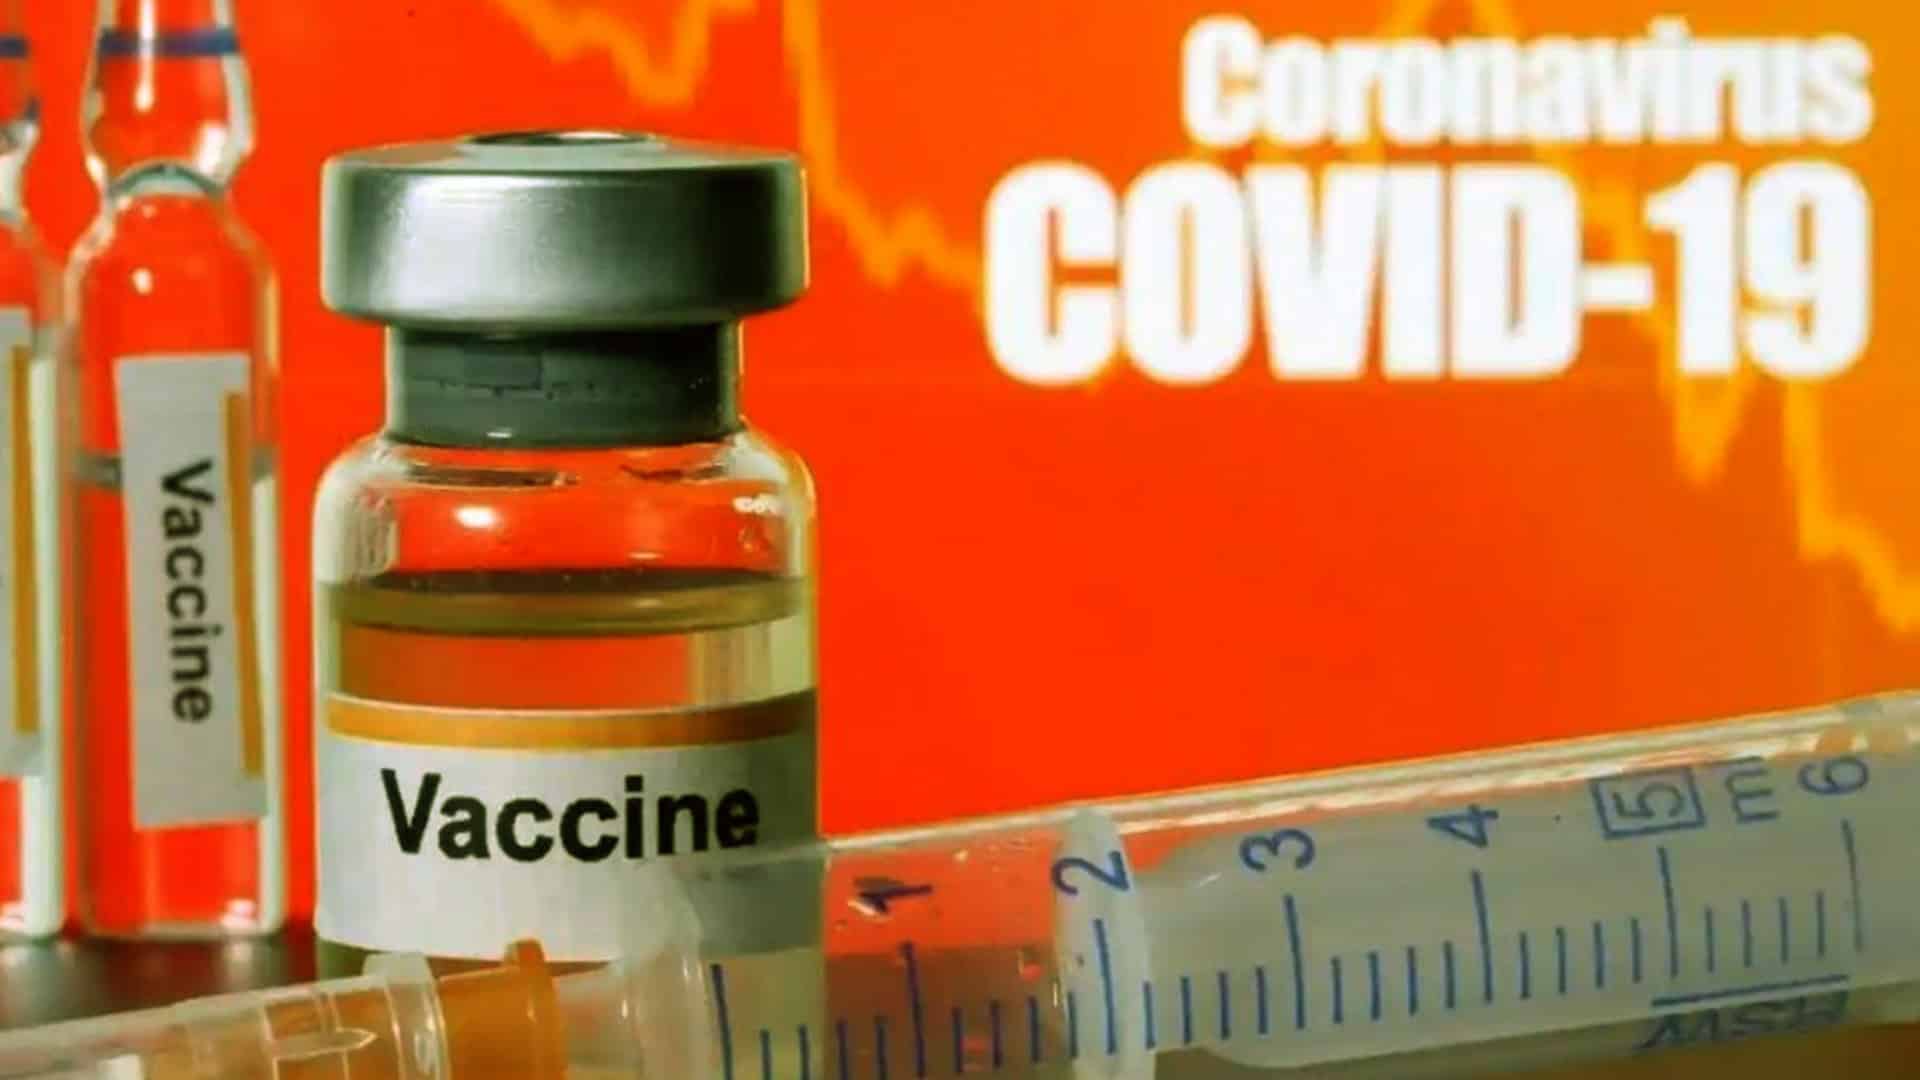 Serum Institute applies for emergency use authorisation for COVID-19 vaccine